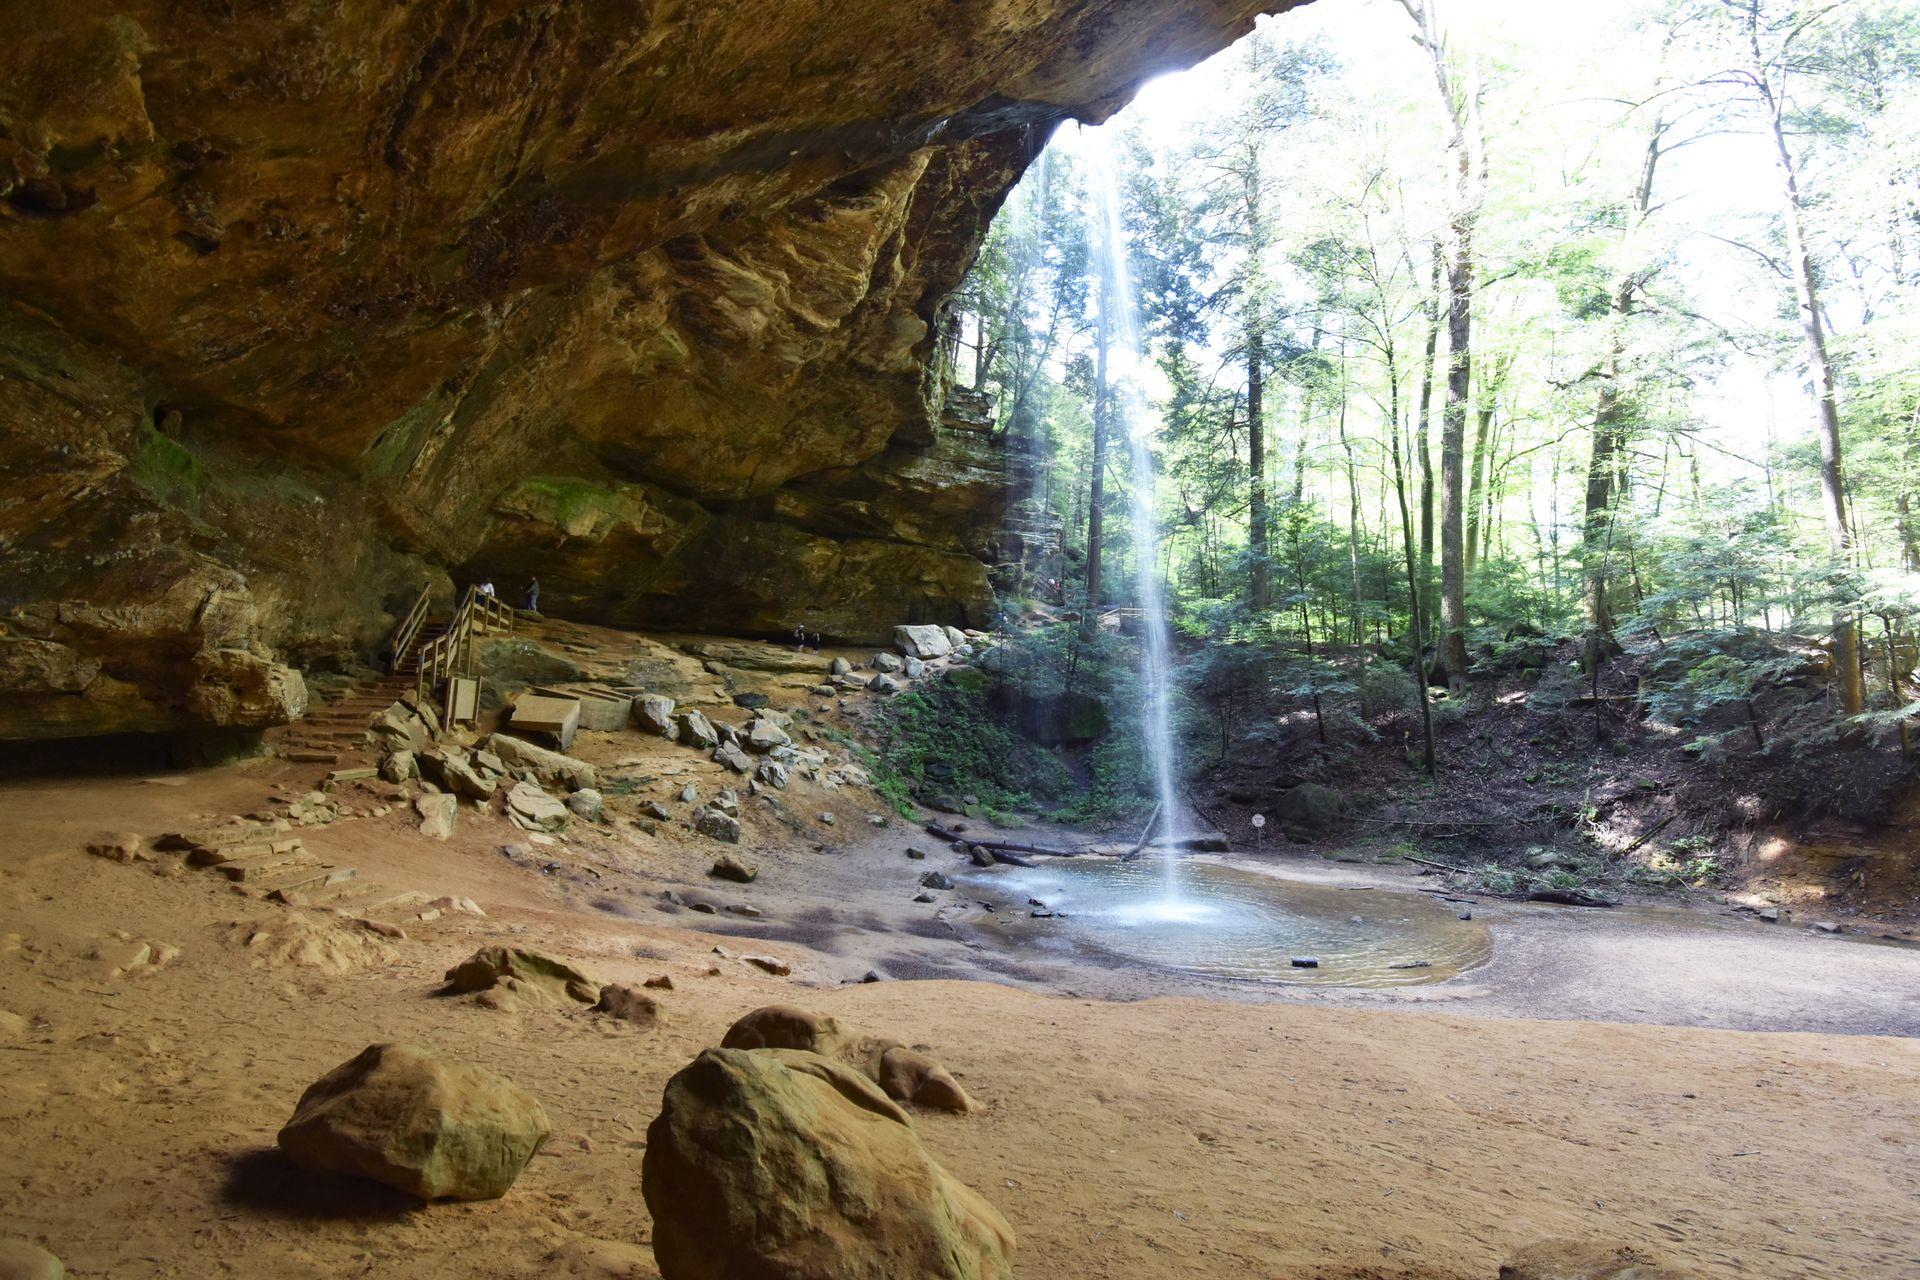 A view from inside of Ash Cave. There is a large overhang and a small waterfall coming off of the edge.